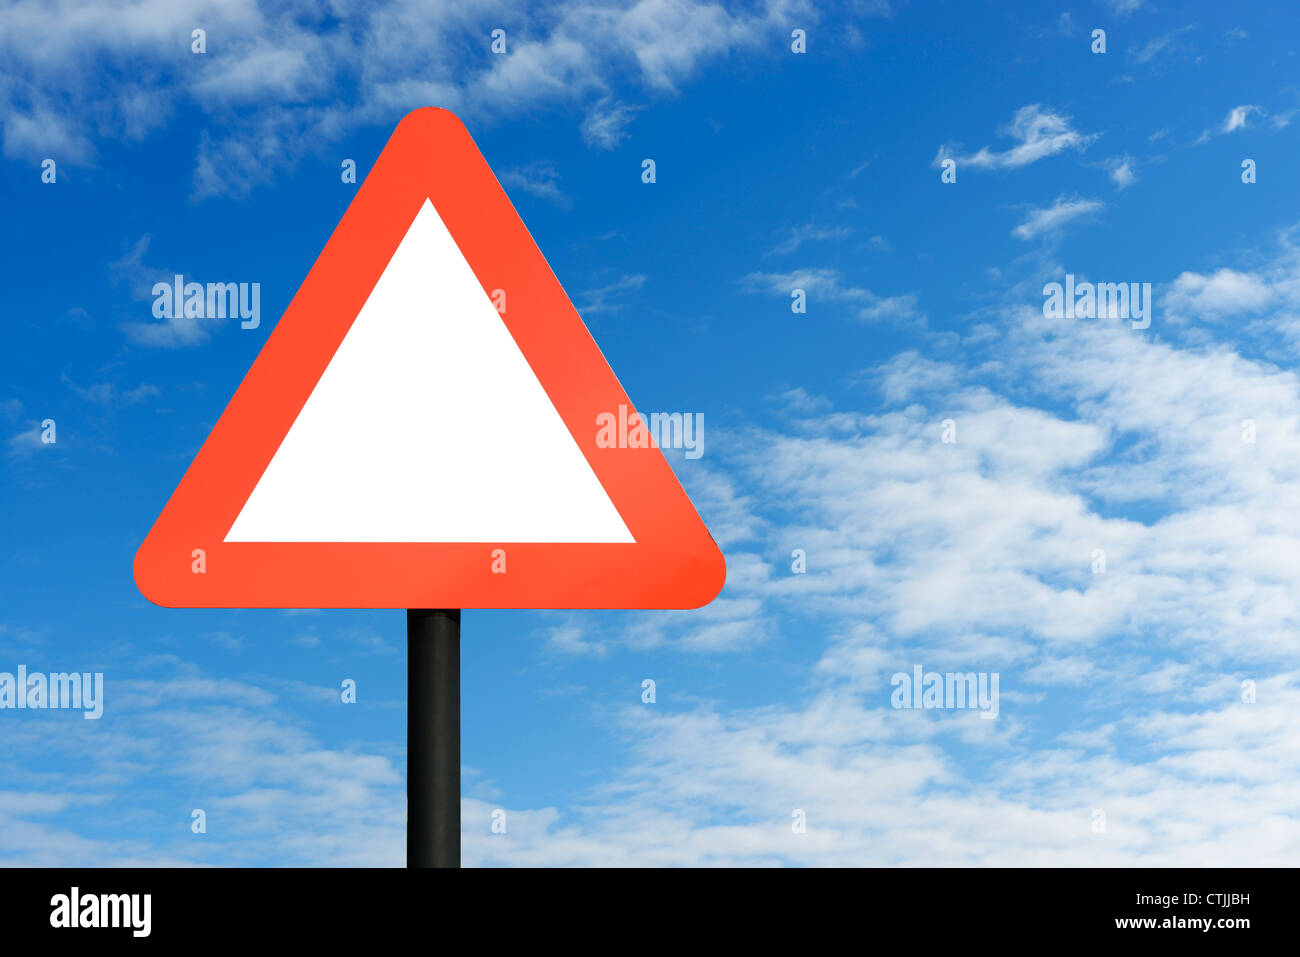 Red blank triangular road sign and blue sky Stock Photo